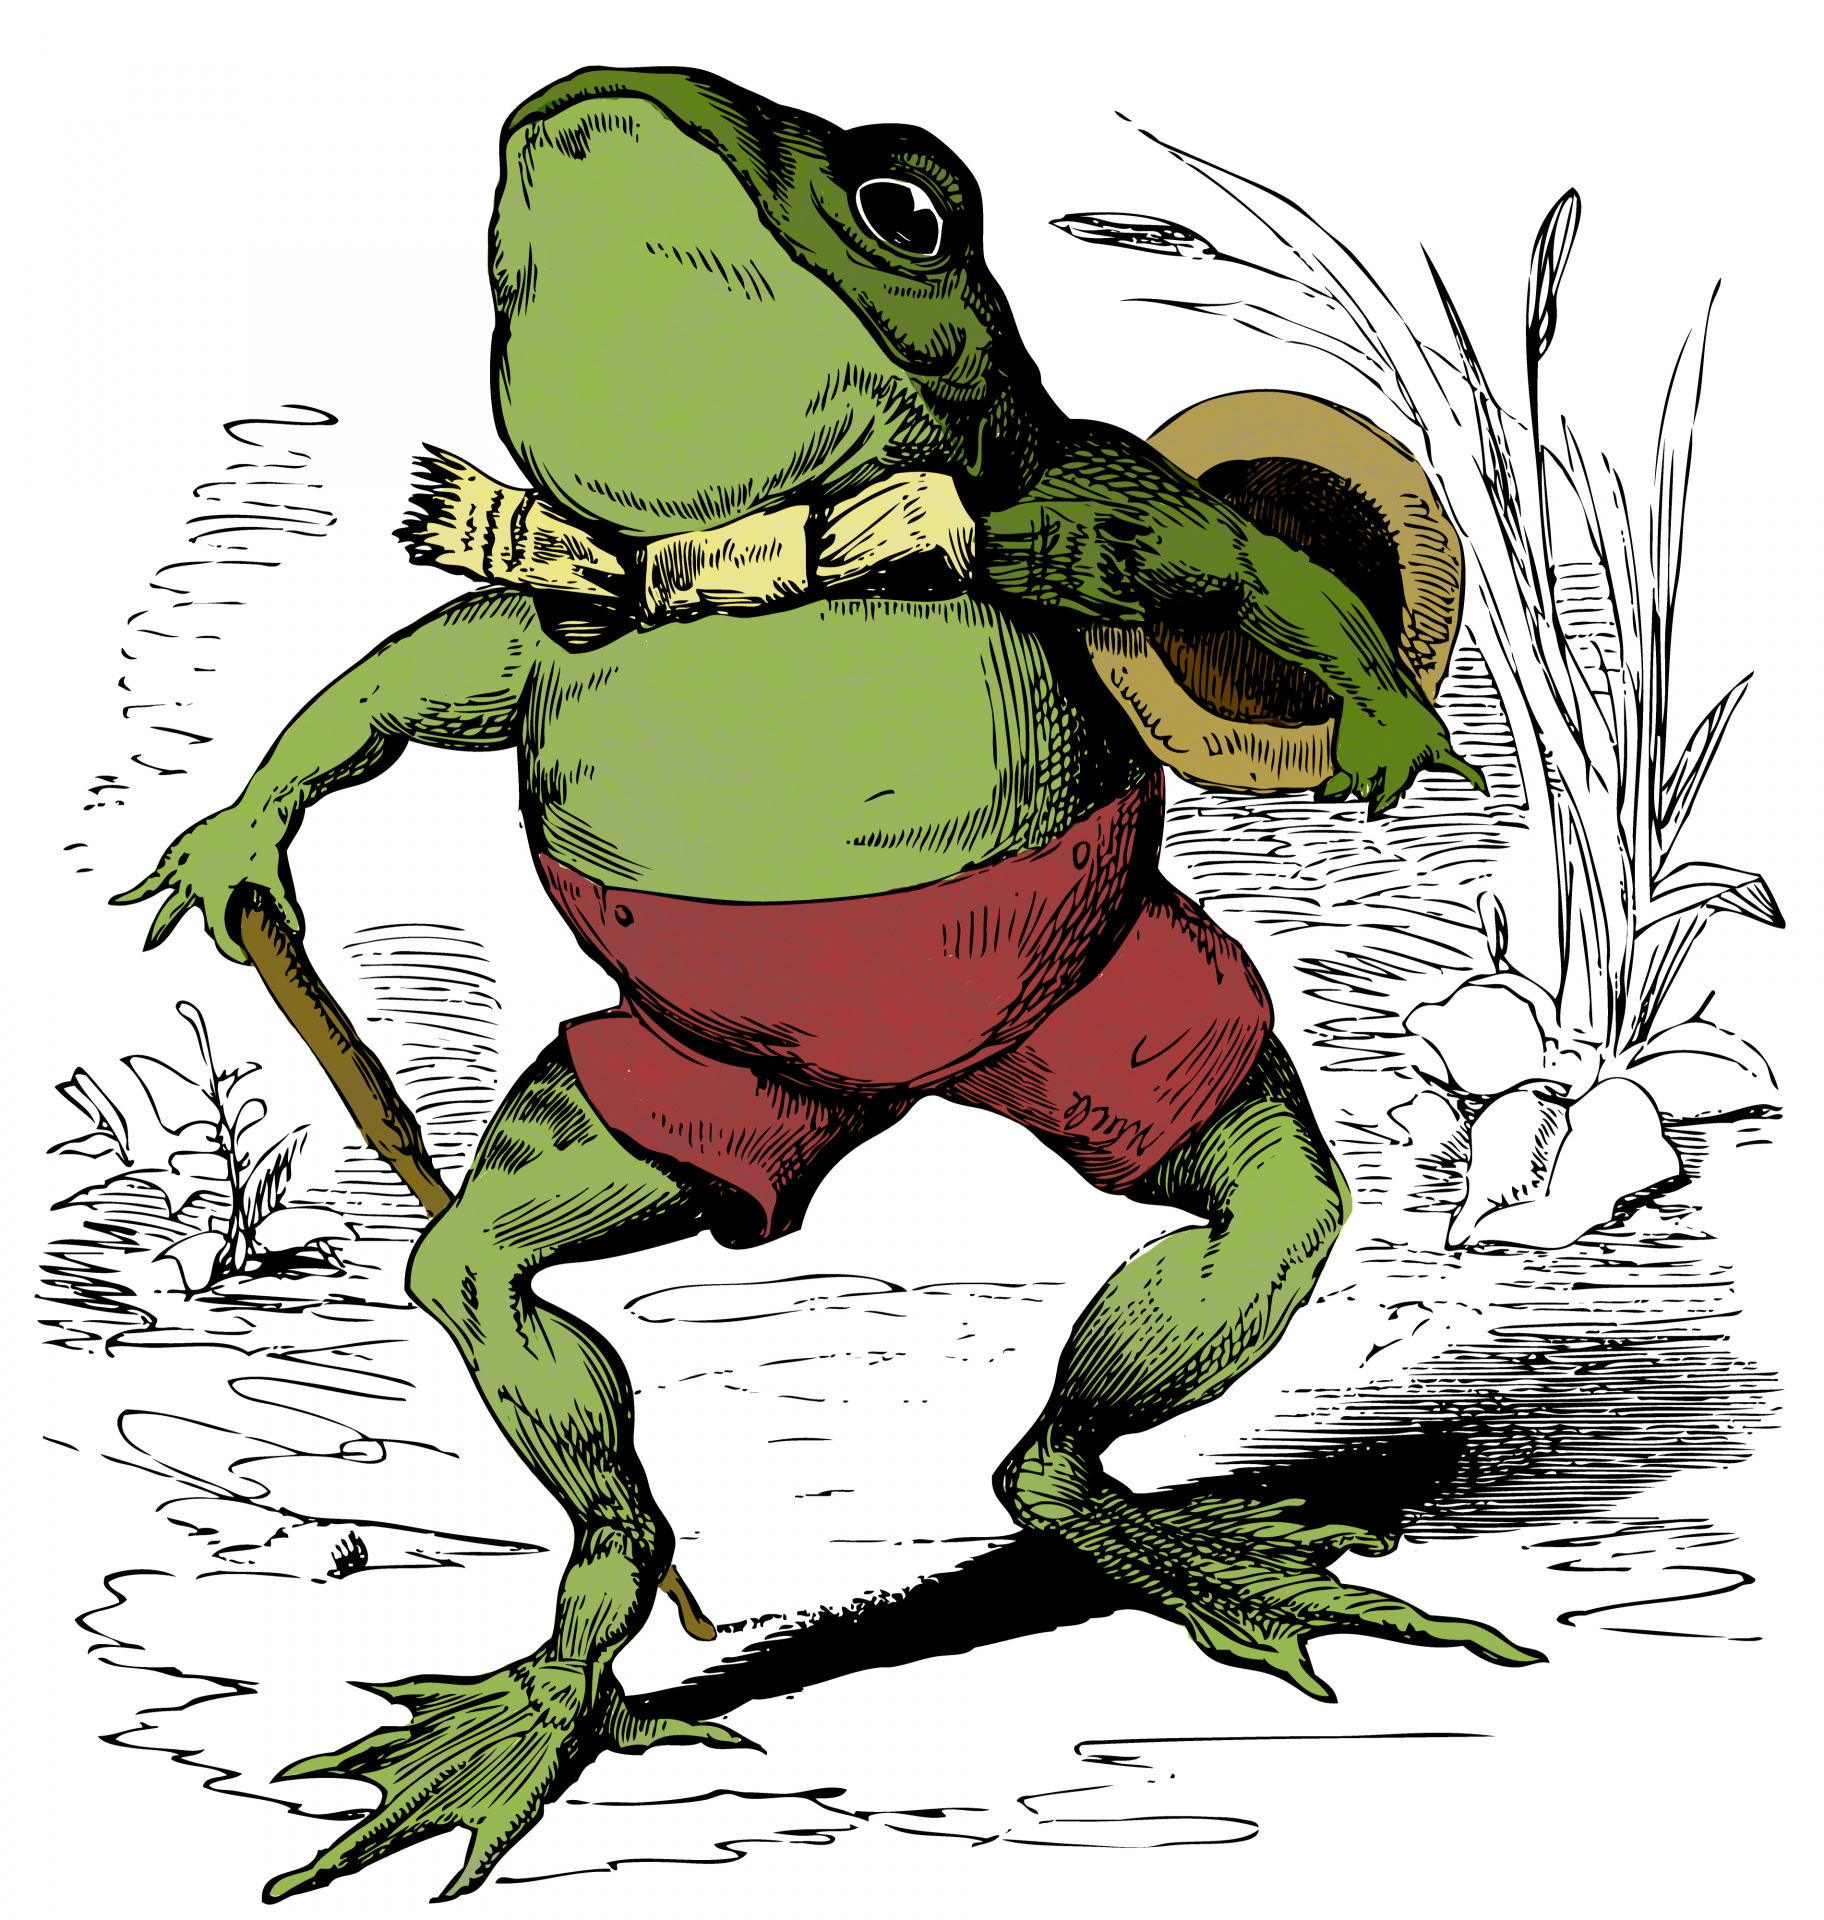 Vintage drawing of a cartoon frog that I have colored in but still retaining the vintage feel